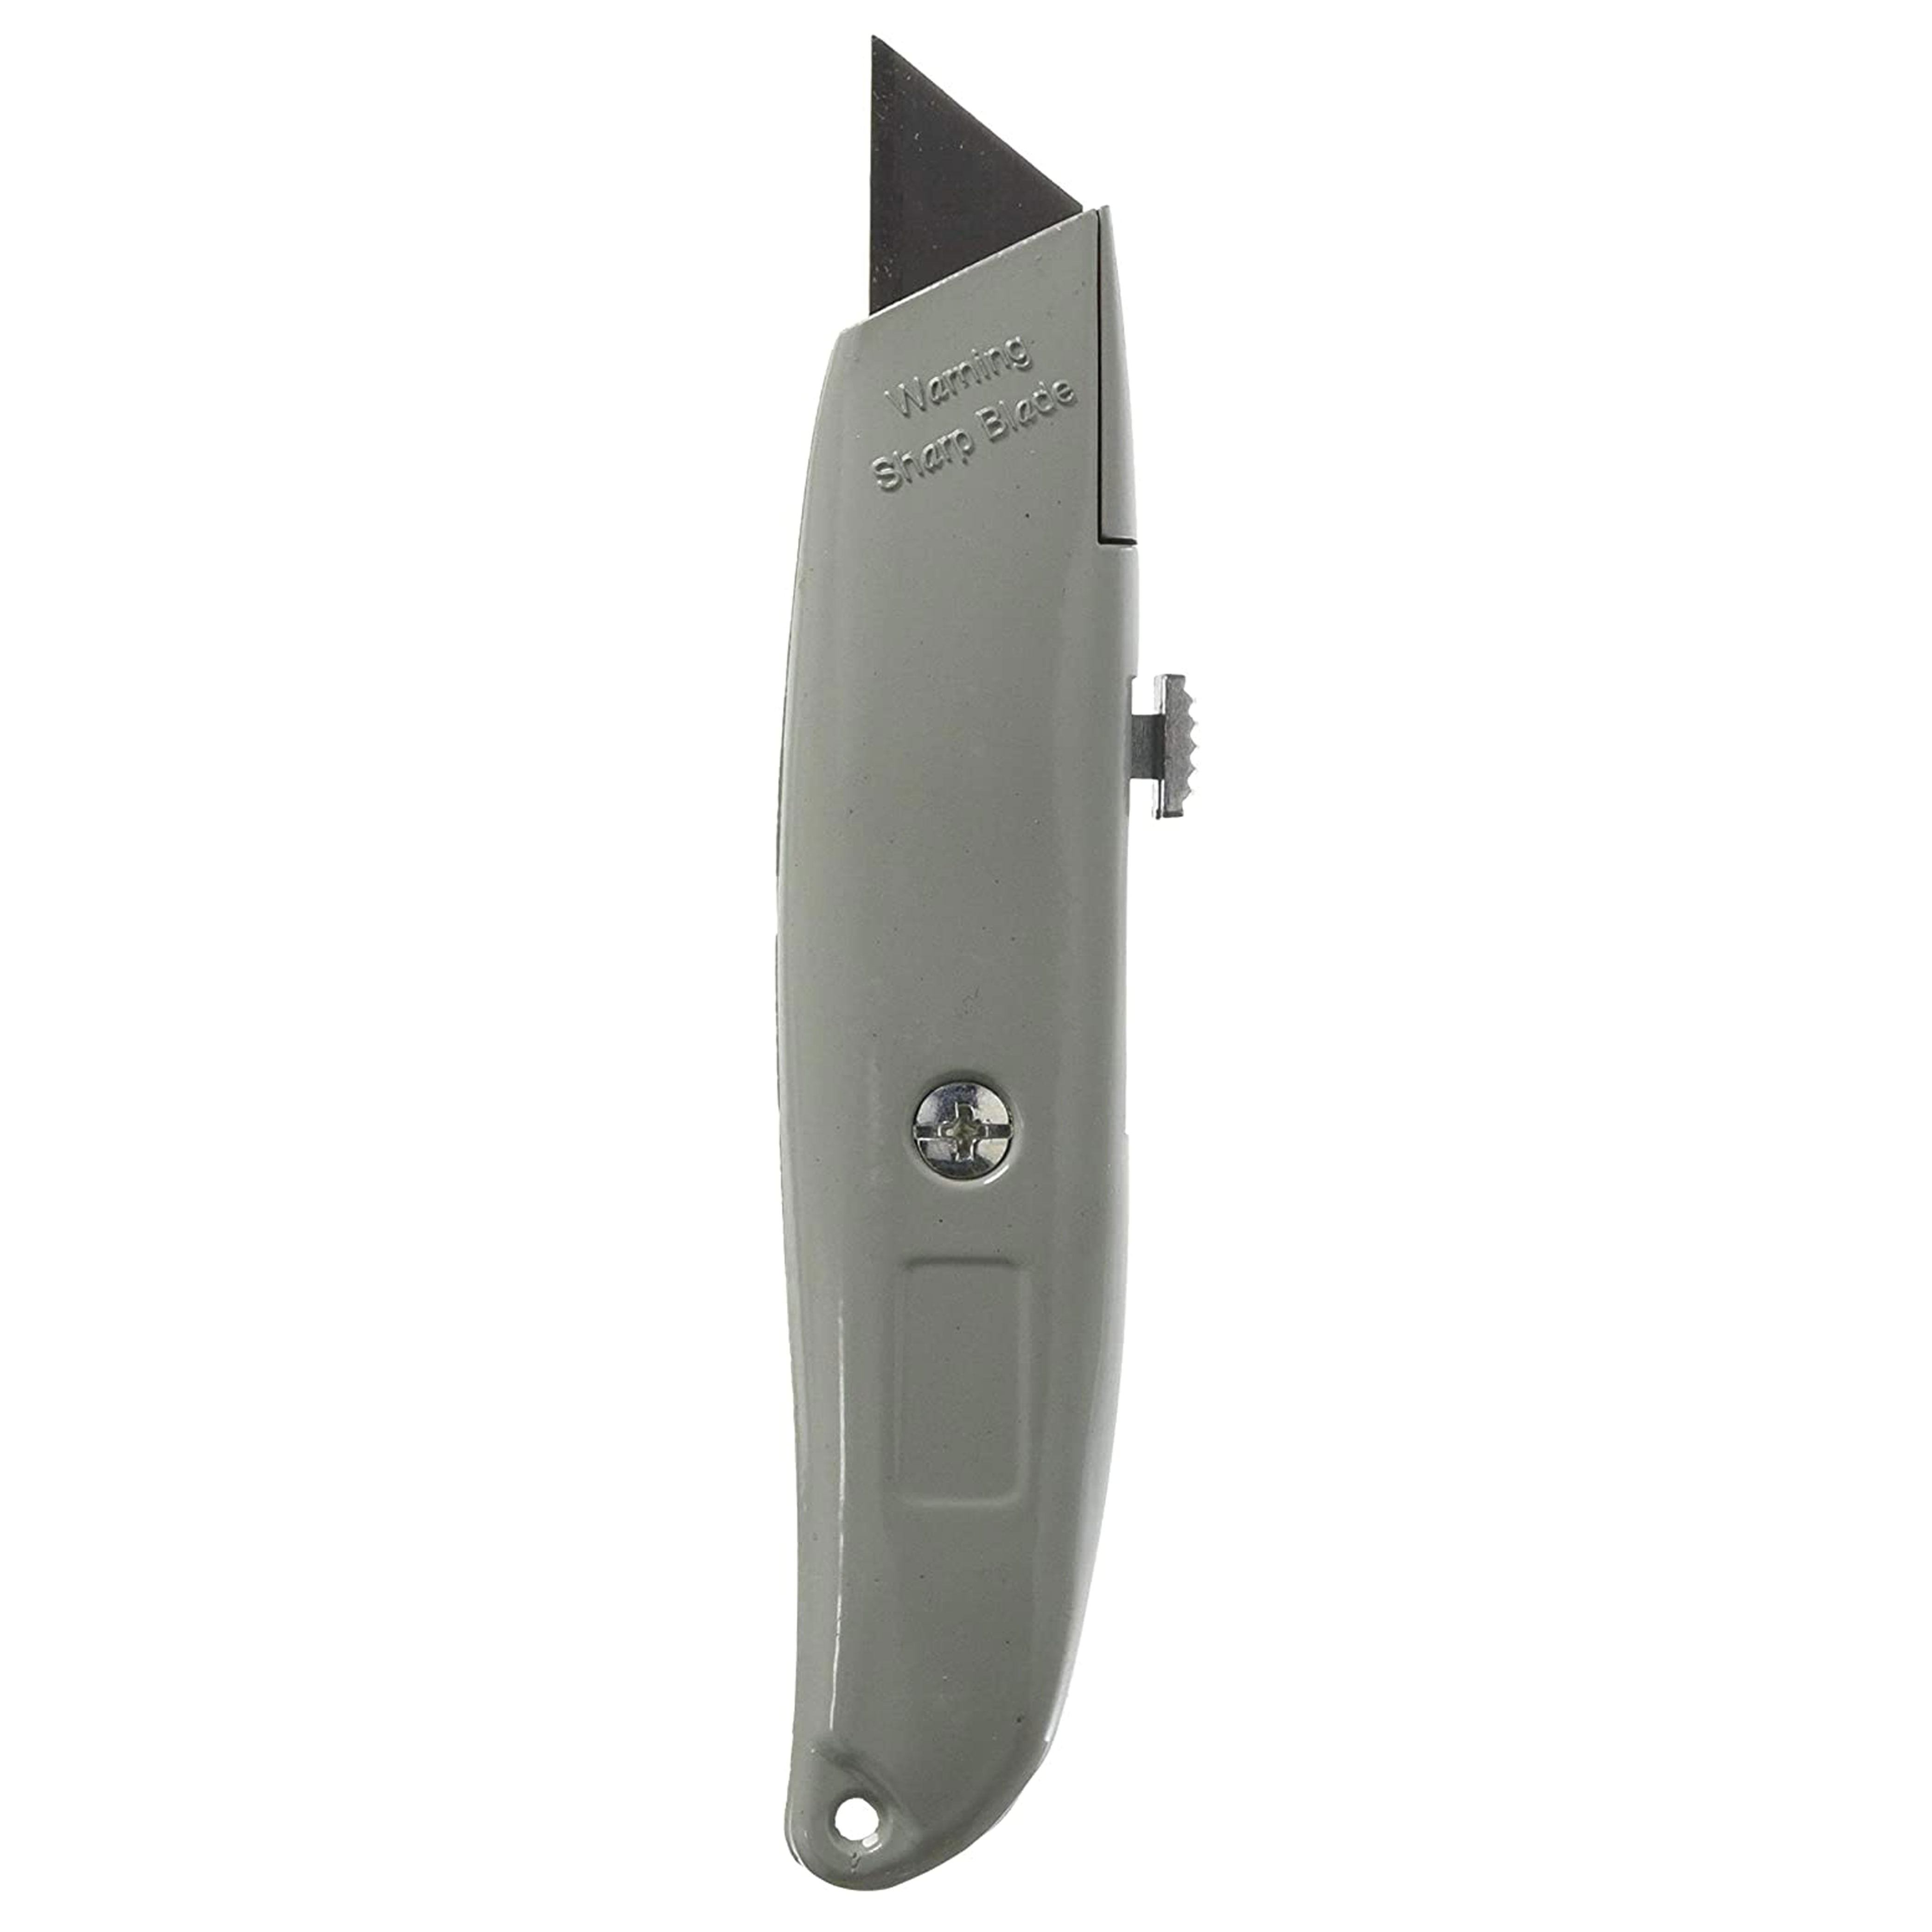 Utility Knife Box Cutter Retractable Squeeze Knife W/5 Sharp